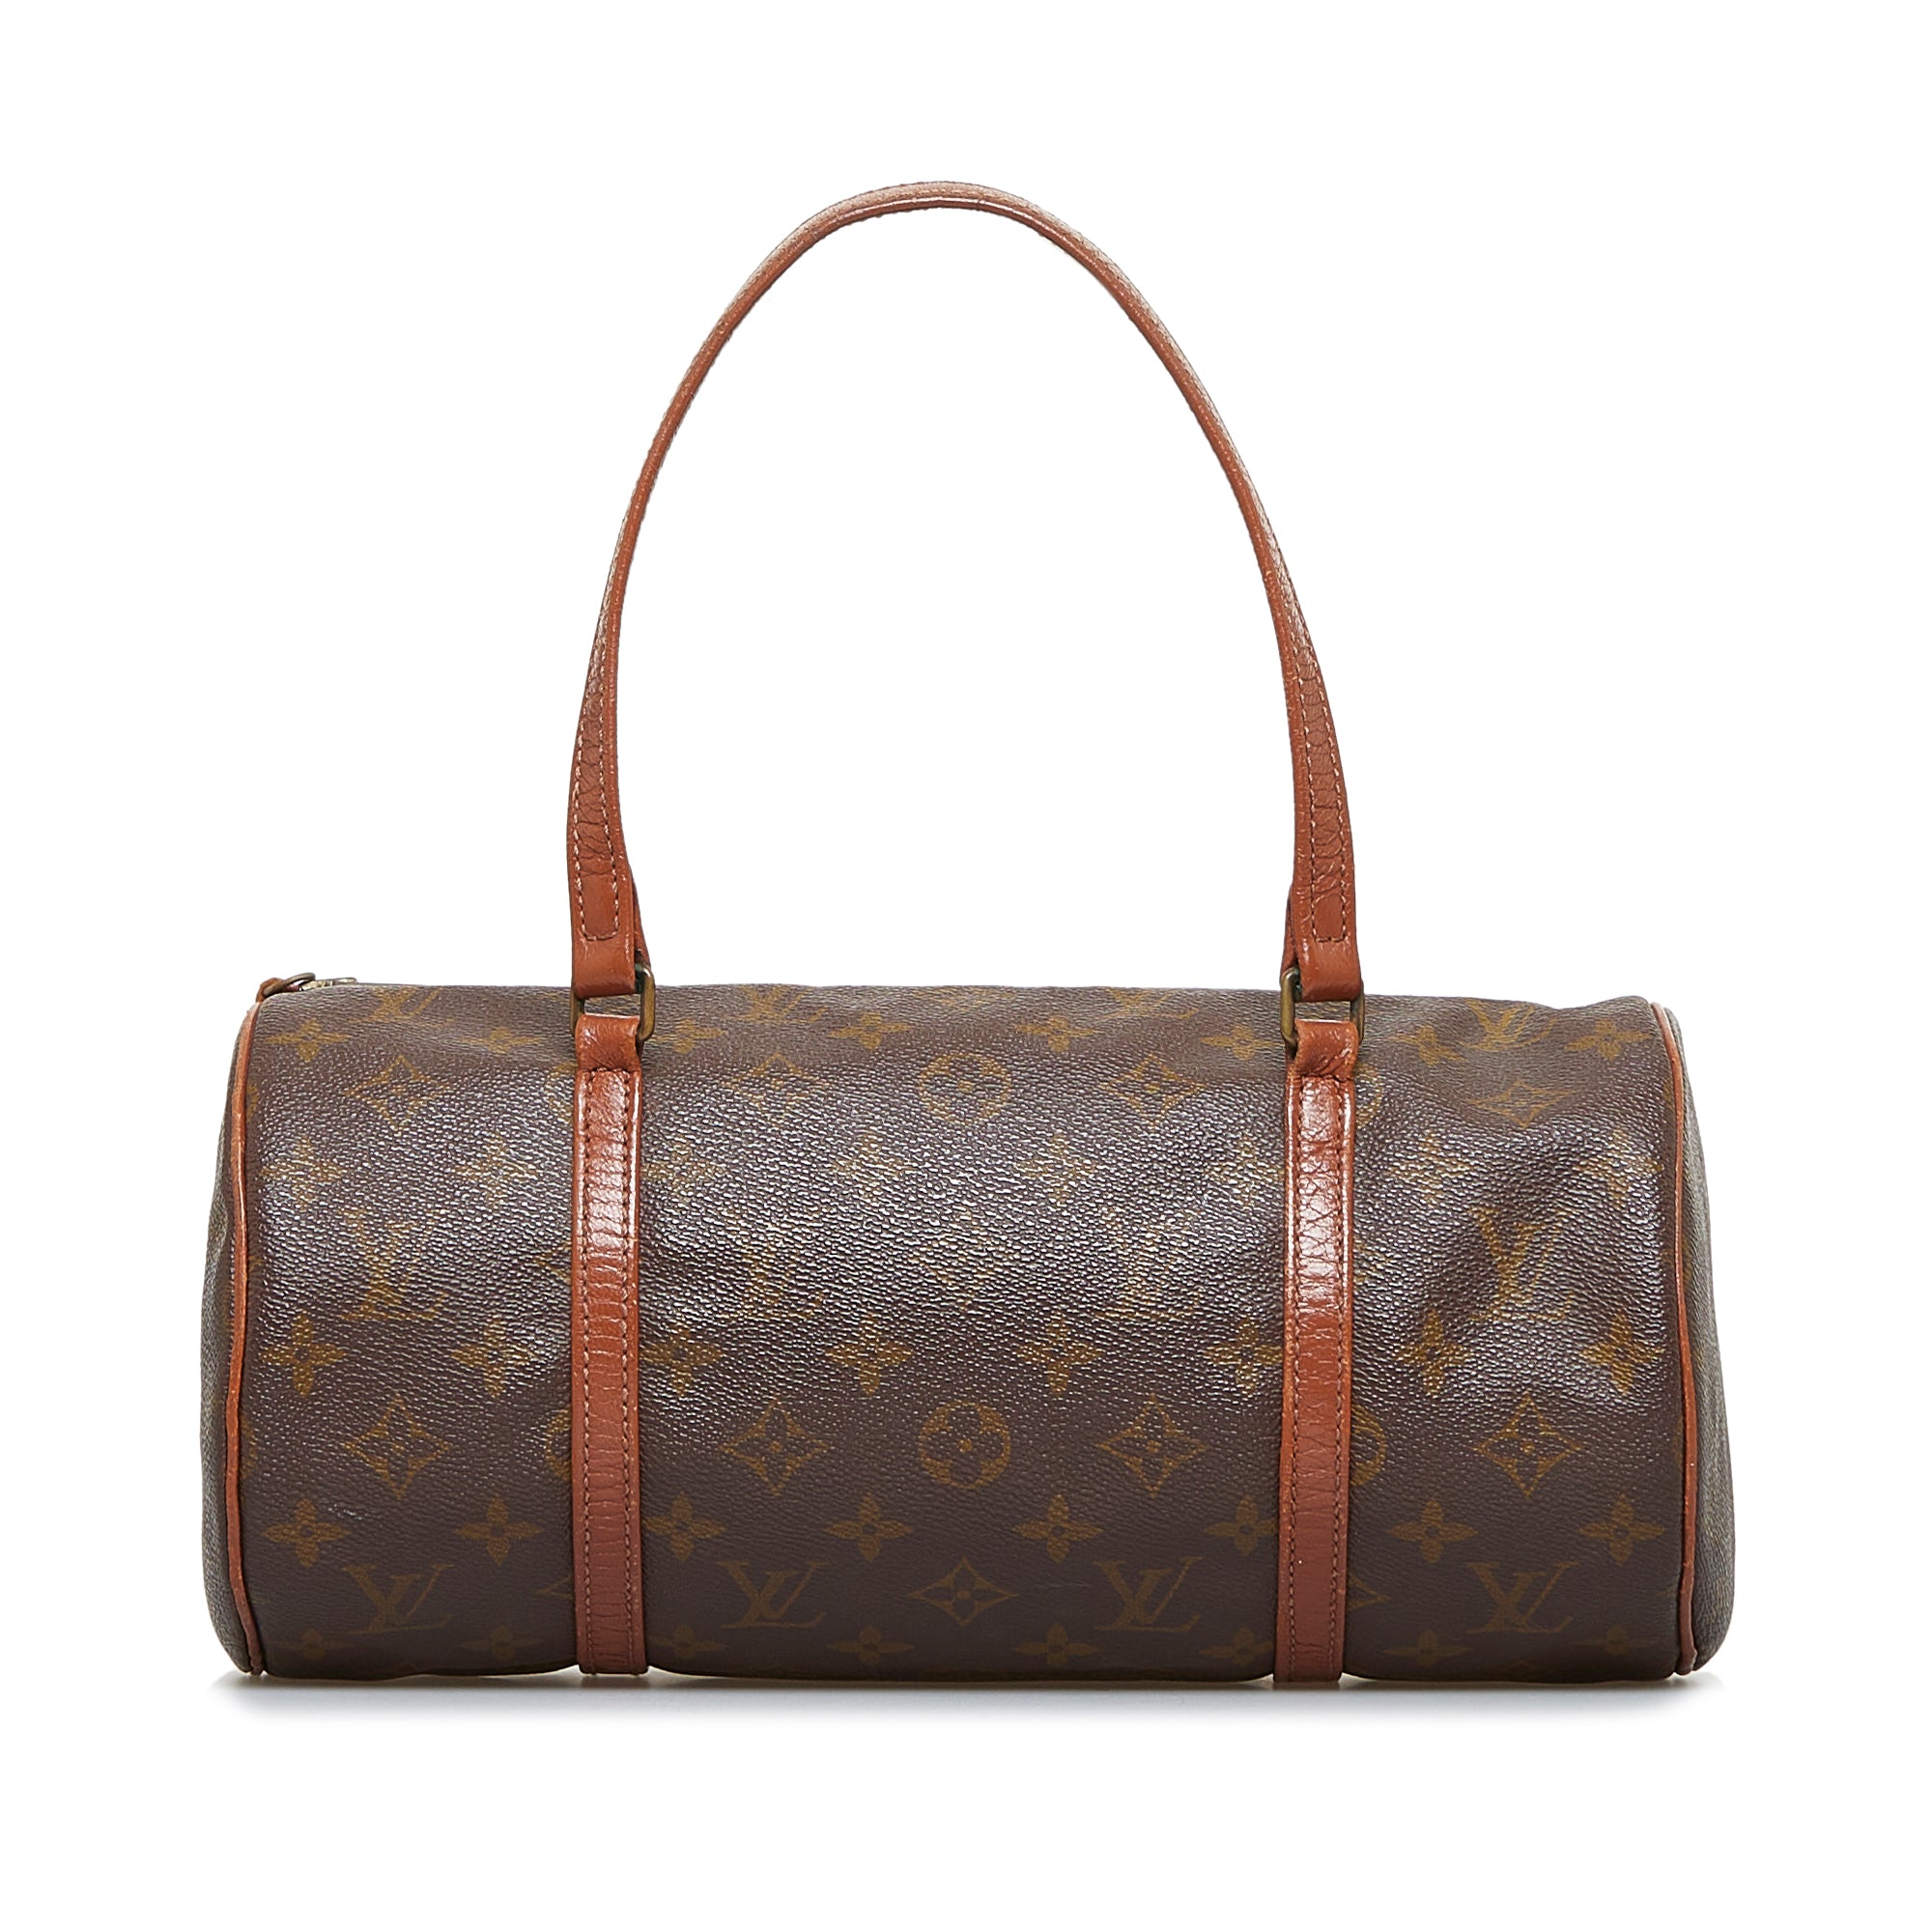 Louis Vuitton Steamer Bag travel bag in brown monogram canvas and natural  leather, Cra-wallonieShops